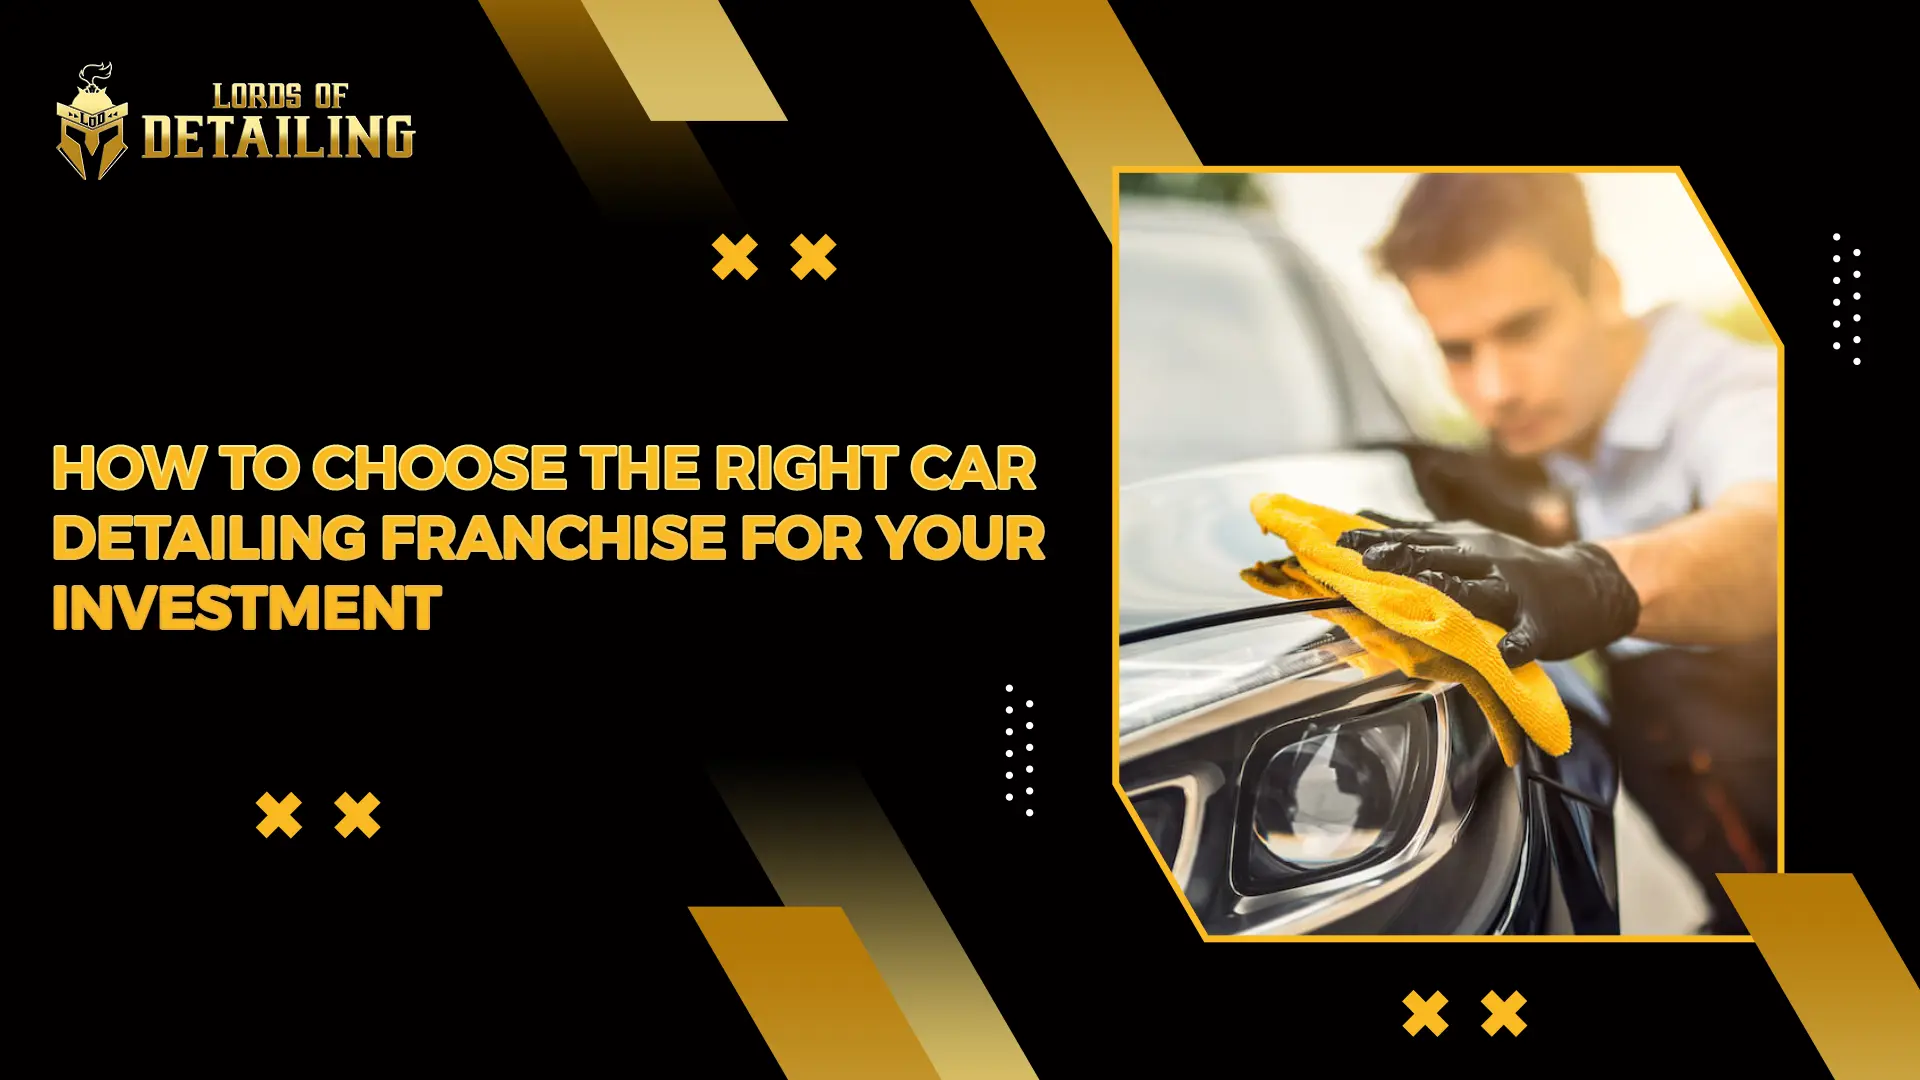 https://lordsofdetailing.com/lod-blog/wp-content/uploads/2024/06/How-to-Choose-the-Right-Car-Detailing-Franchise-for-Your-Investment.webp